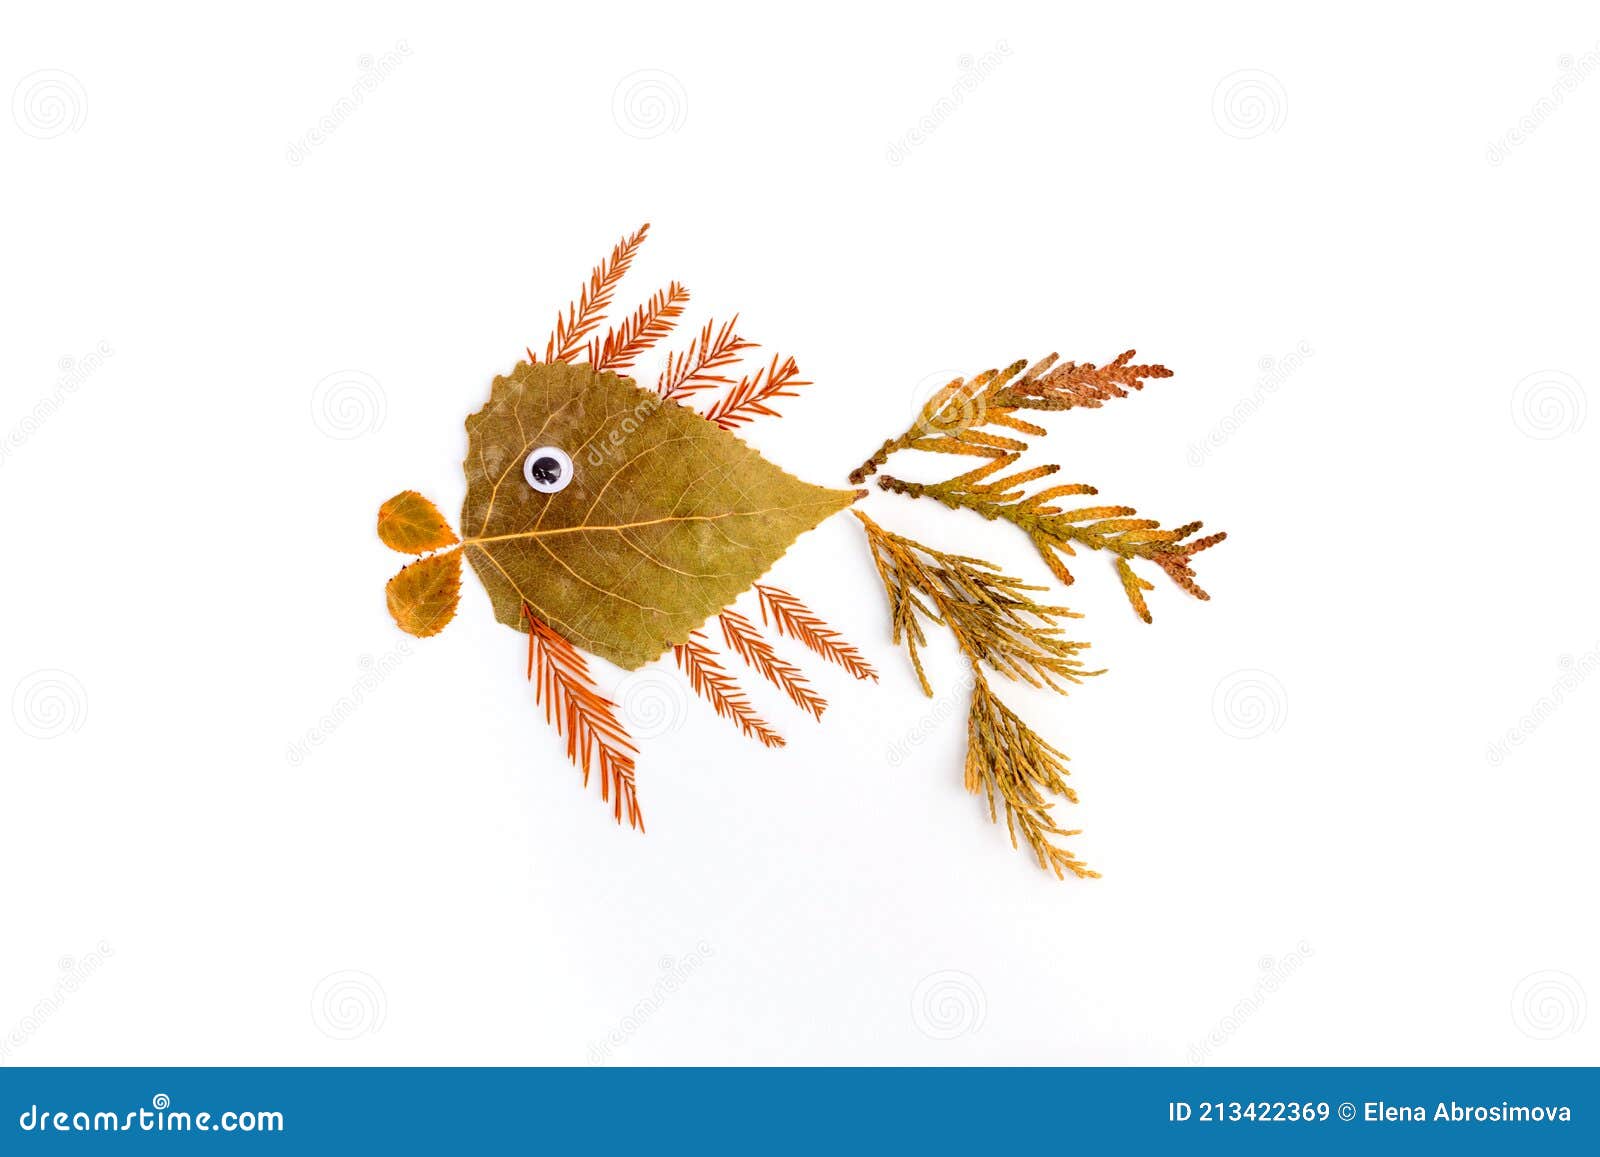 Abstract Herbarium Children Autumn Decoration, Colorful Kids Leaf Craft,  Fish Made of Leaves Stock Image - Image of beautiful, season: 213422369